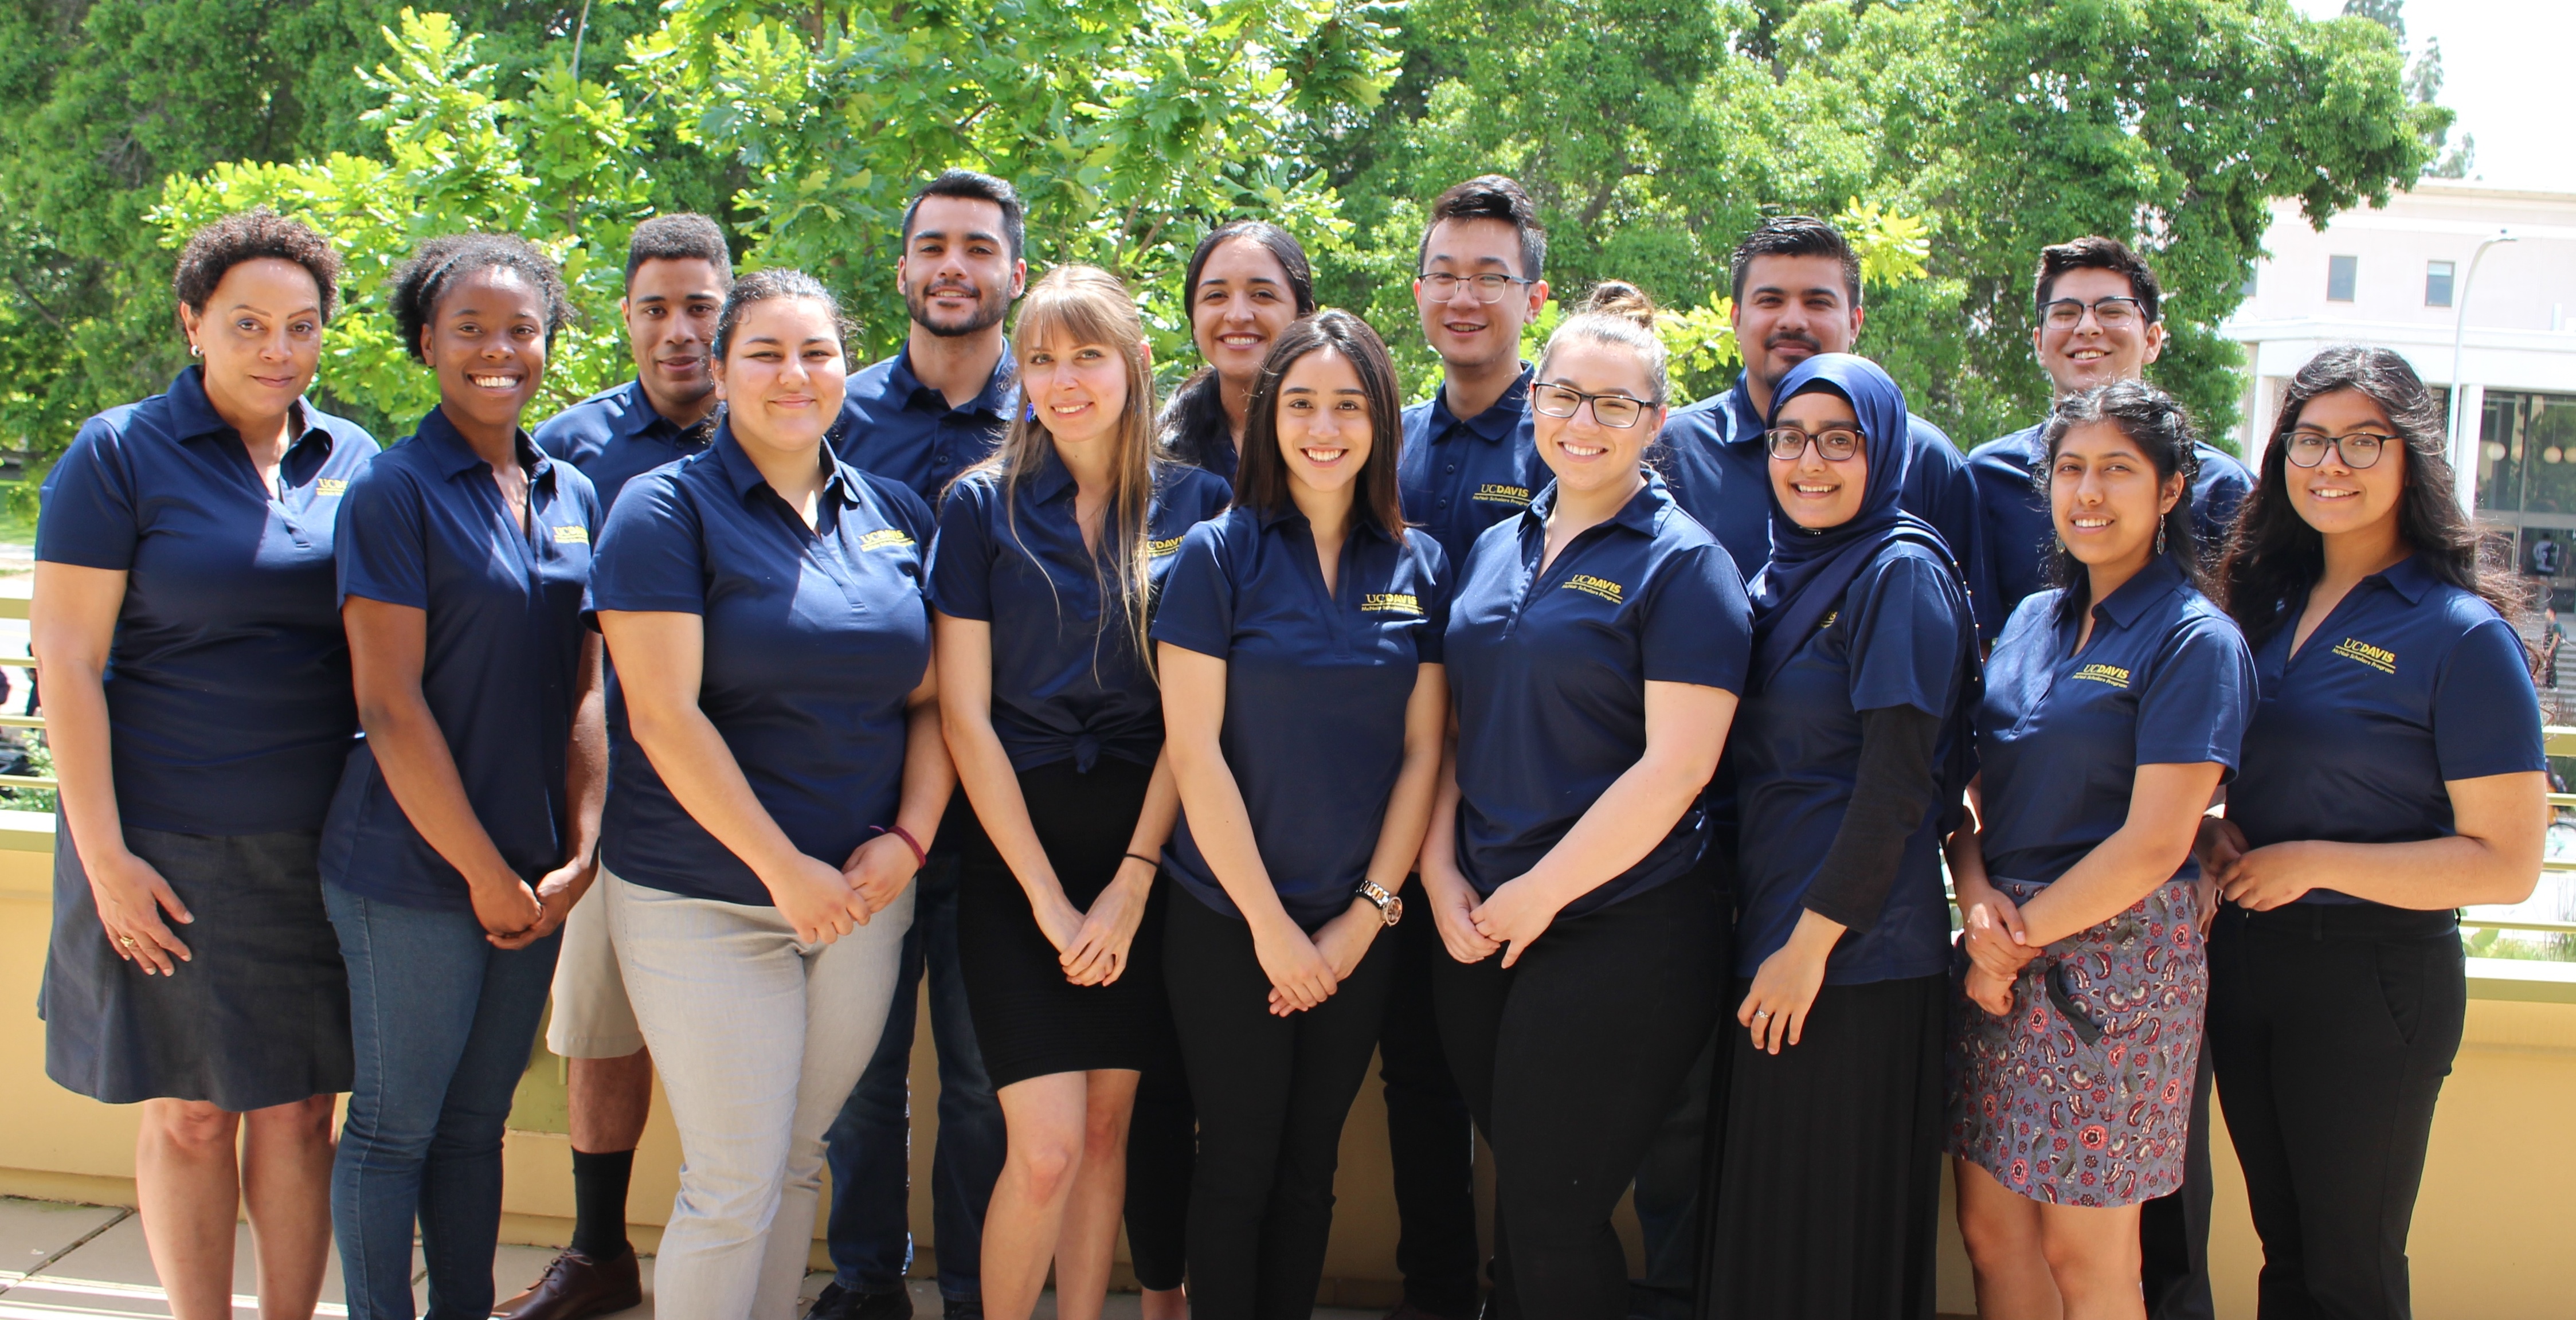 Help historically underrepresented students prepare for doctoral studies through hands-on research and other scholarly activities. Join us and make a gift to the McNair Scholars Program Fund. https://tinyurl.com/mcnairscholars #UCDavisGiveDay #EveryAggieCounts